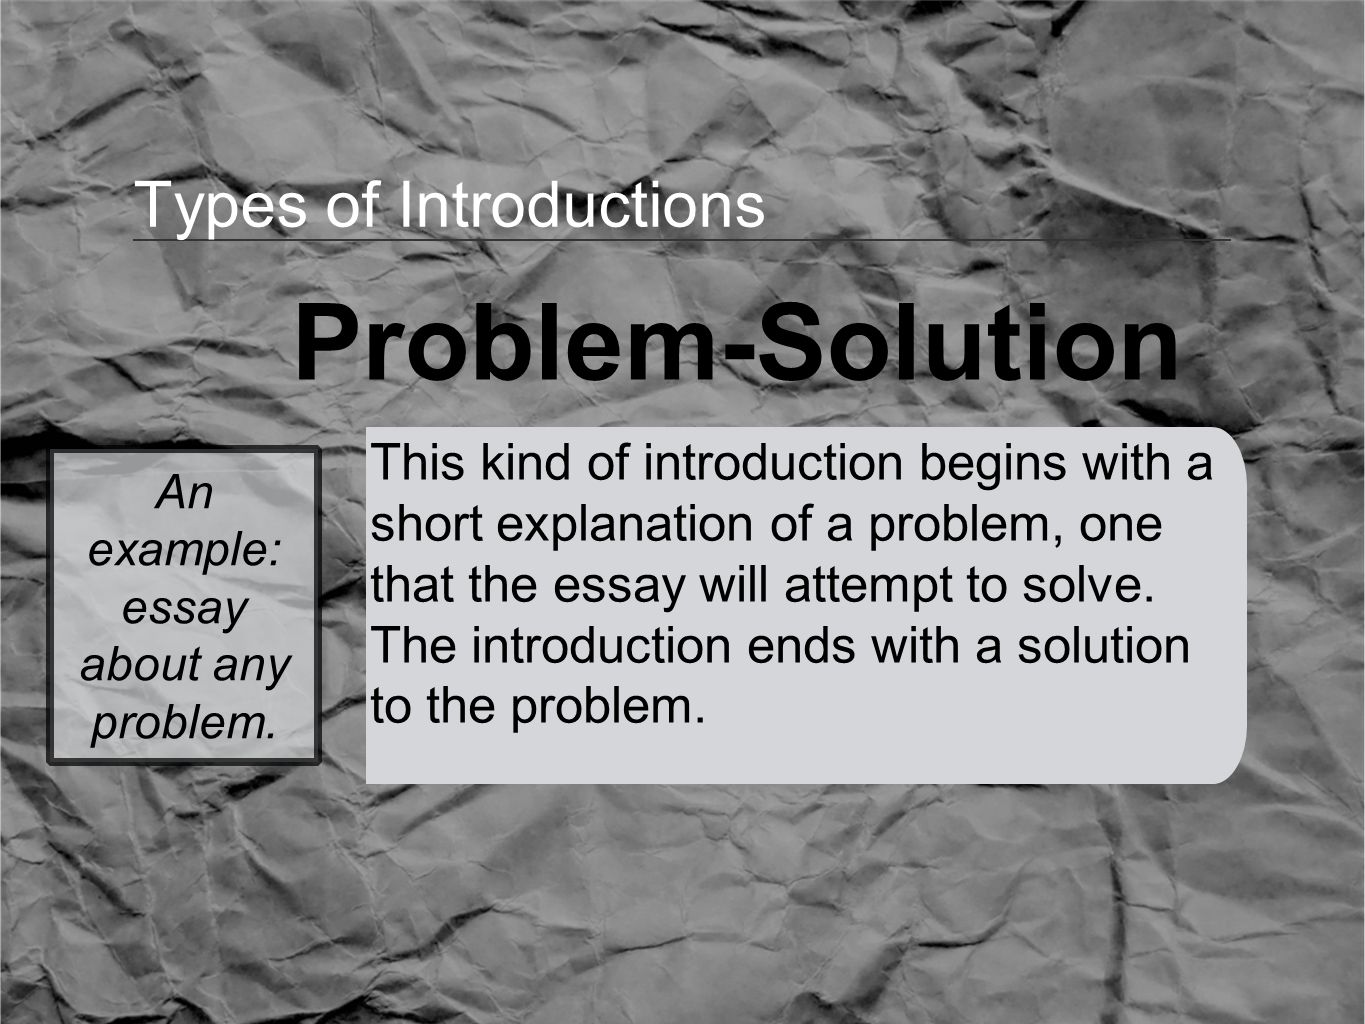 Types of Introductions Problem-Solution This kind of introduction begins with a short explanation of a problem, one that the essay will attempt to solve.